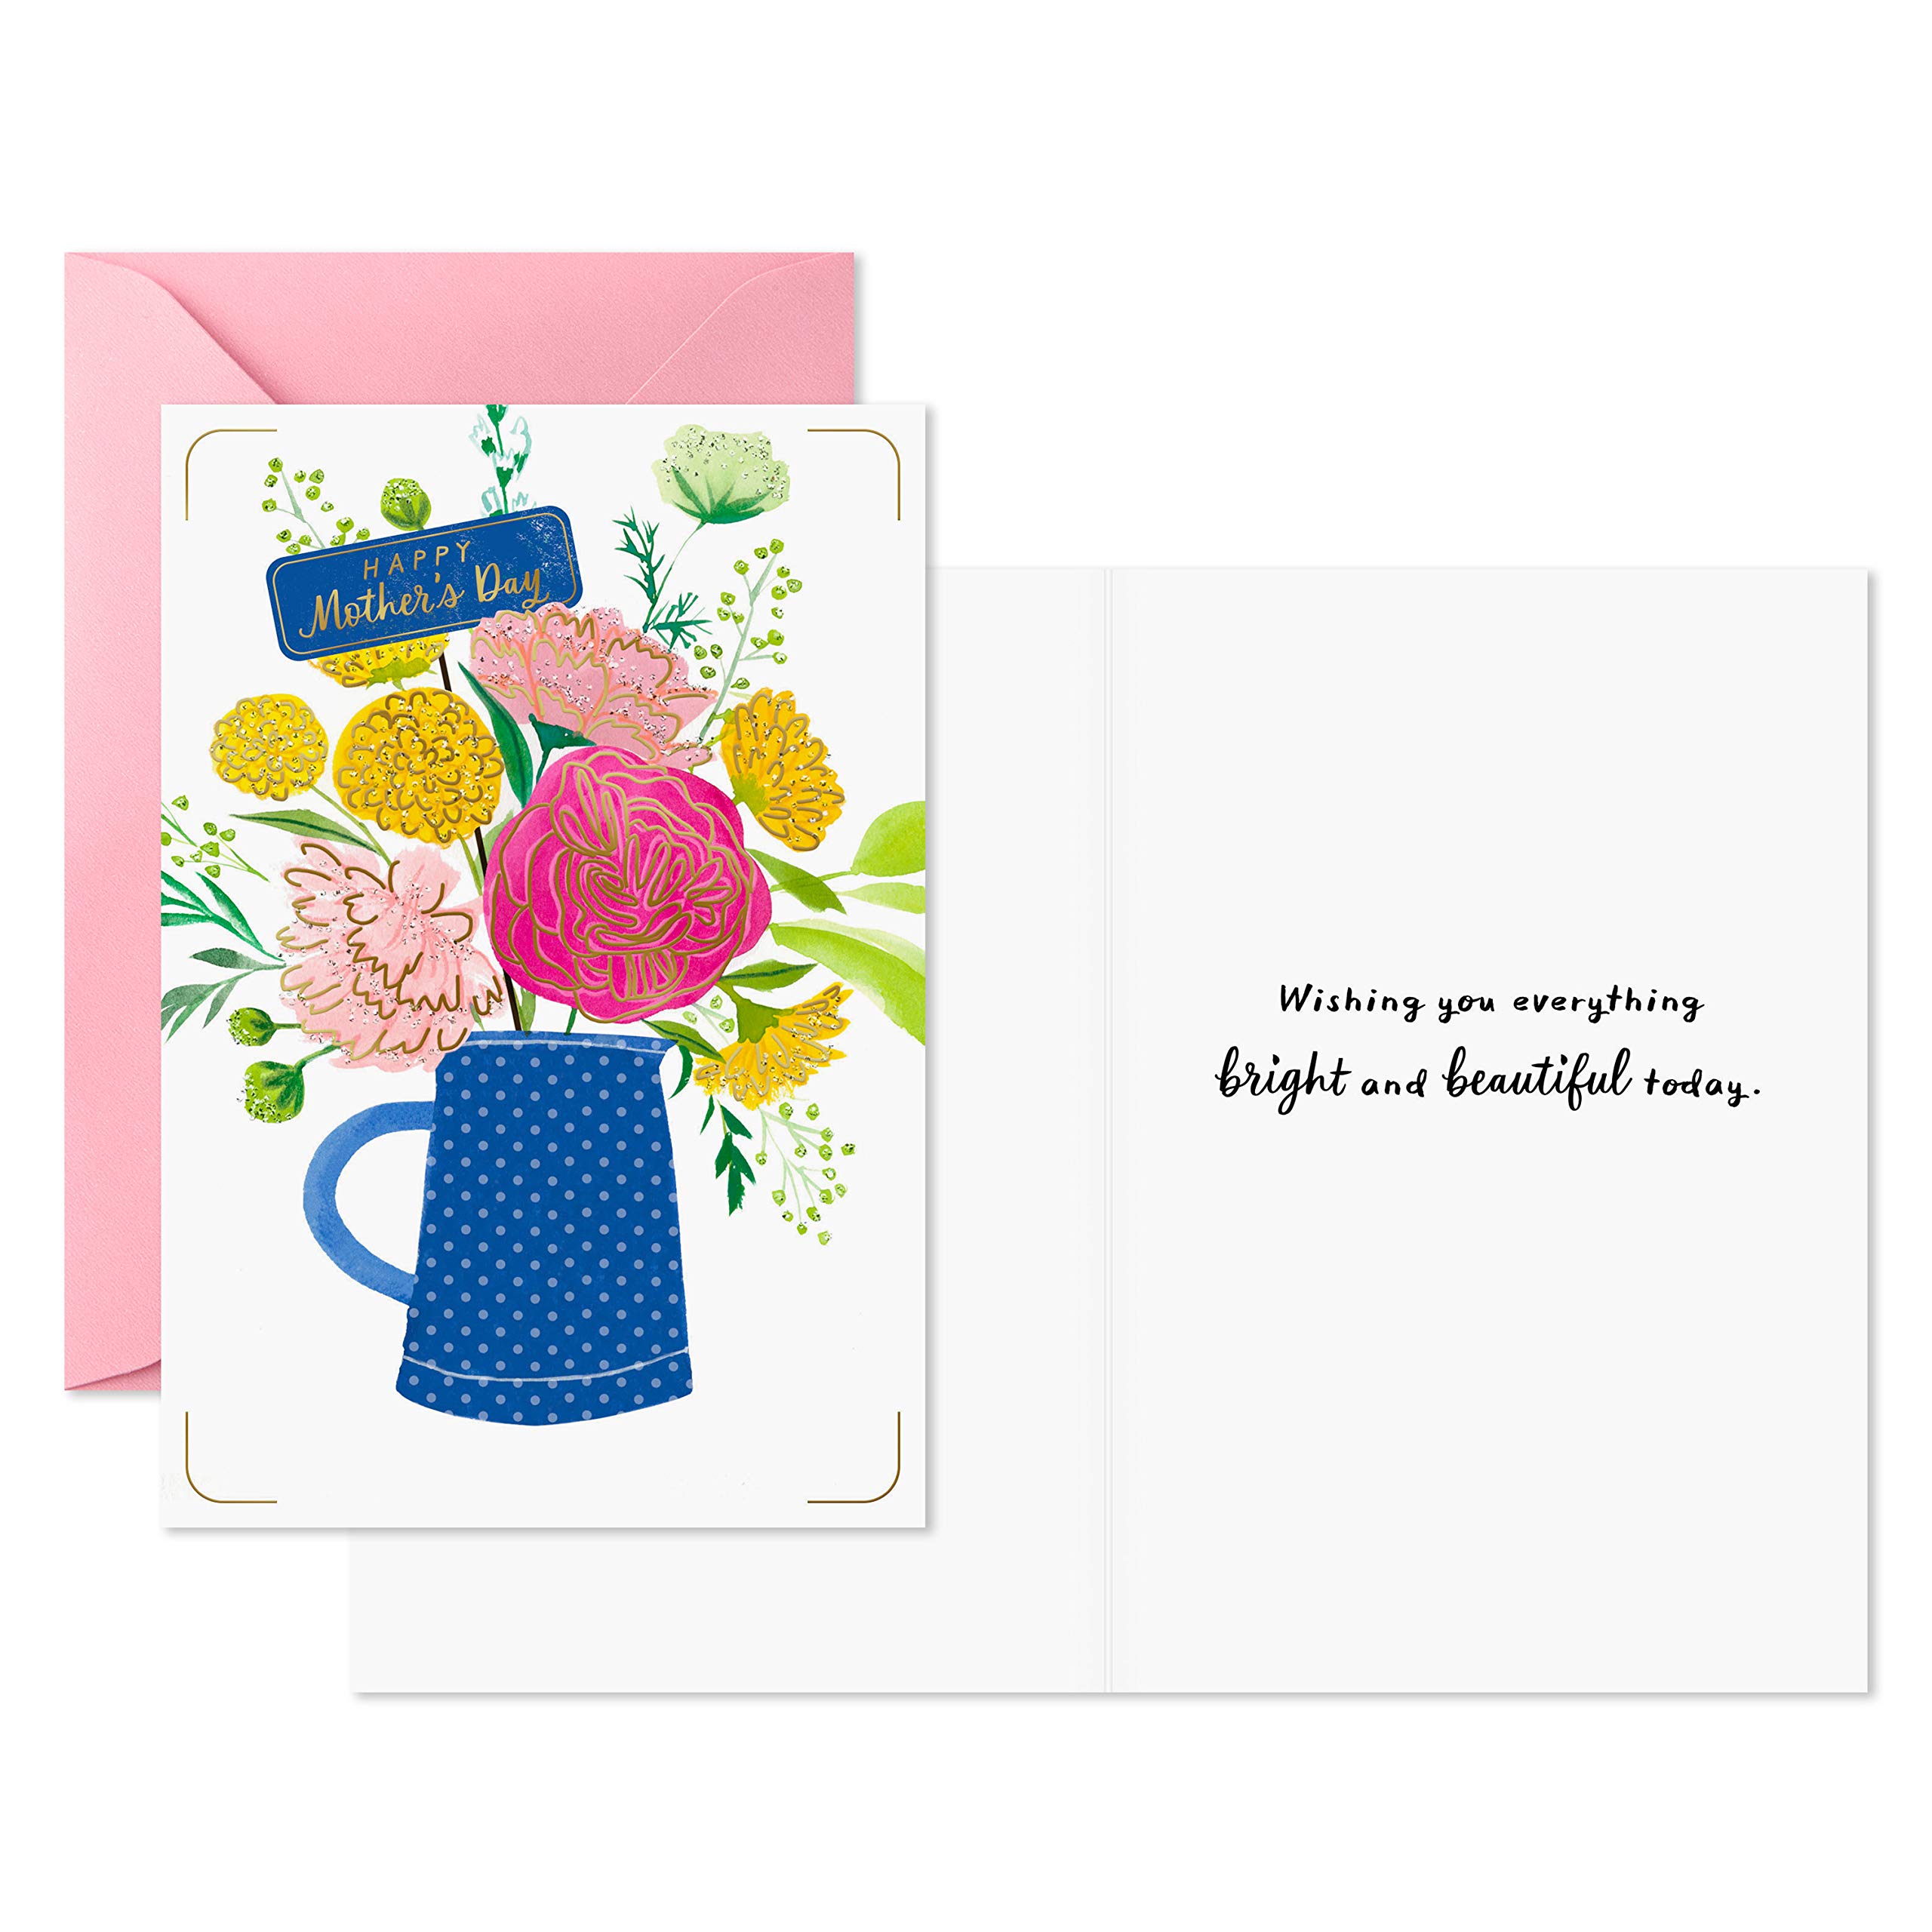 Hallmark Mothers Day Card Assortment, Enjoy Your Special Day (6 Cards with Envelopes, 2 Designs)